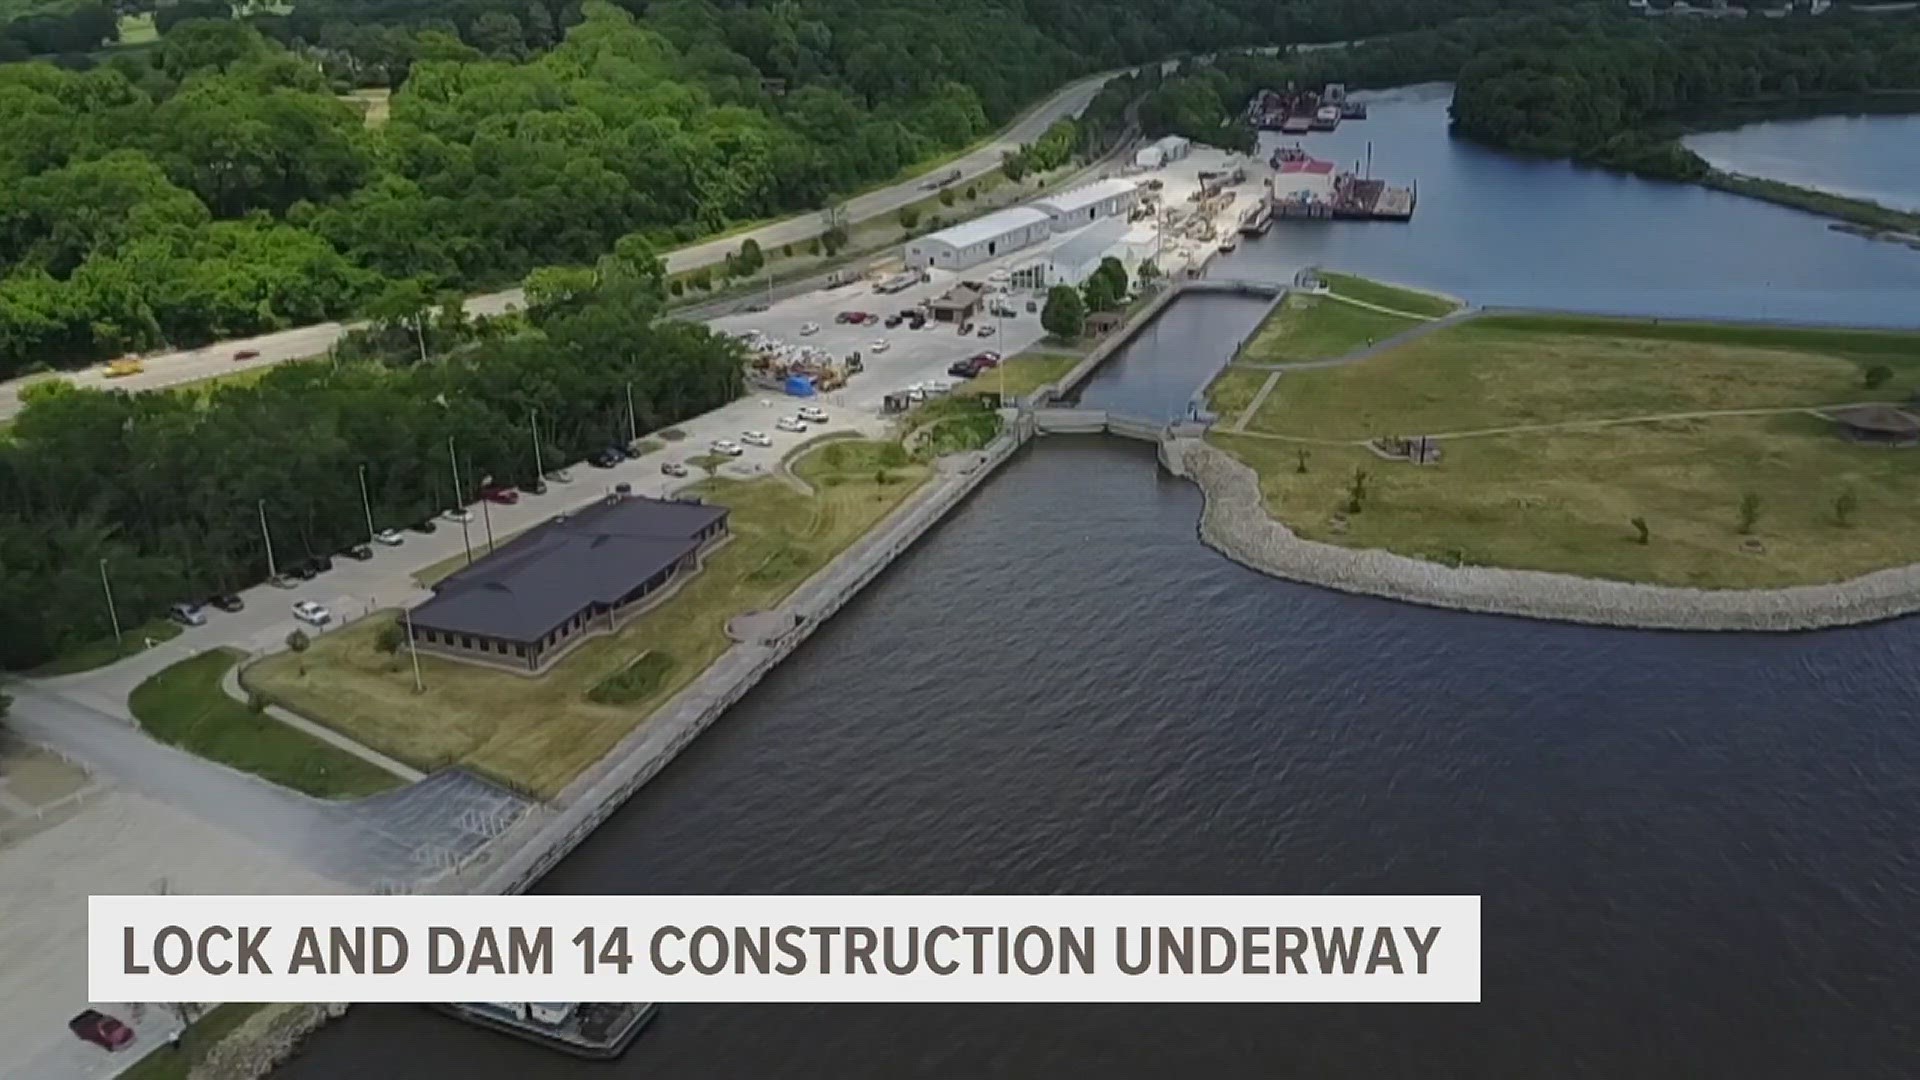 The U.S. Army Corps of Engineers is installing a mooring cell which will allow vessels to wait much closer to the dam, reducing travel time.